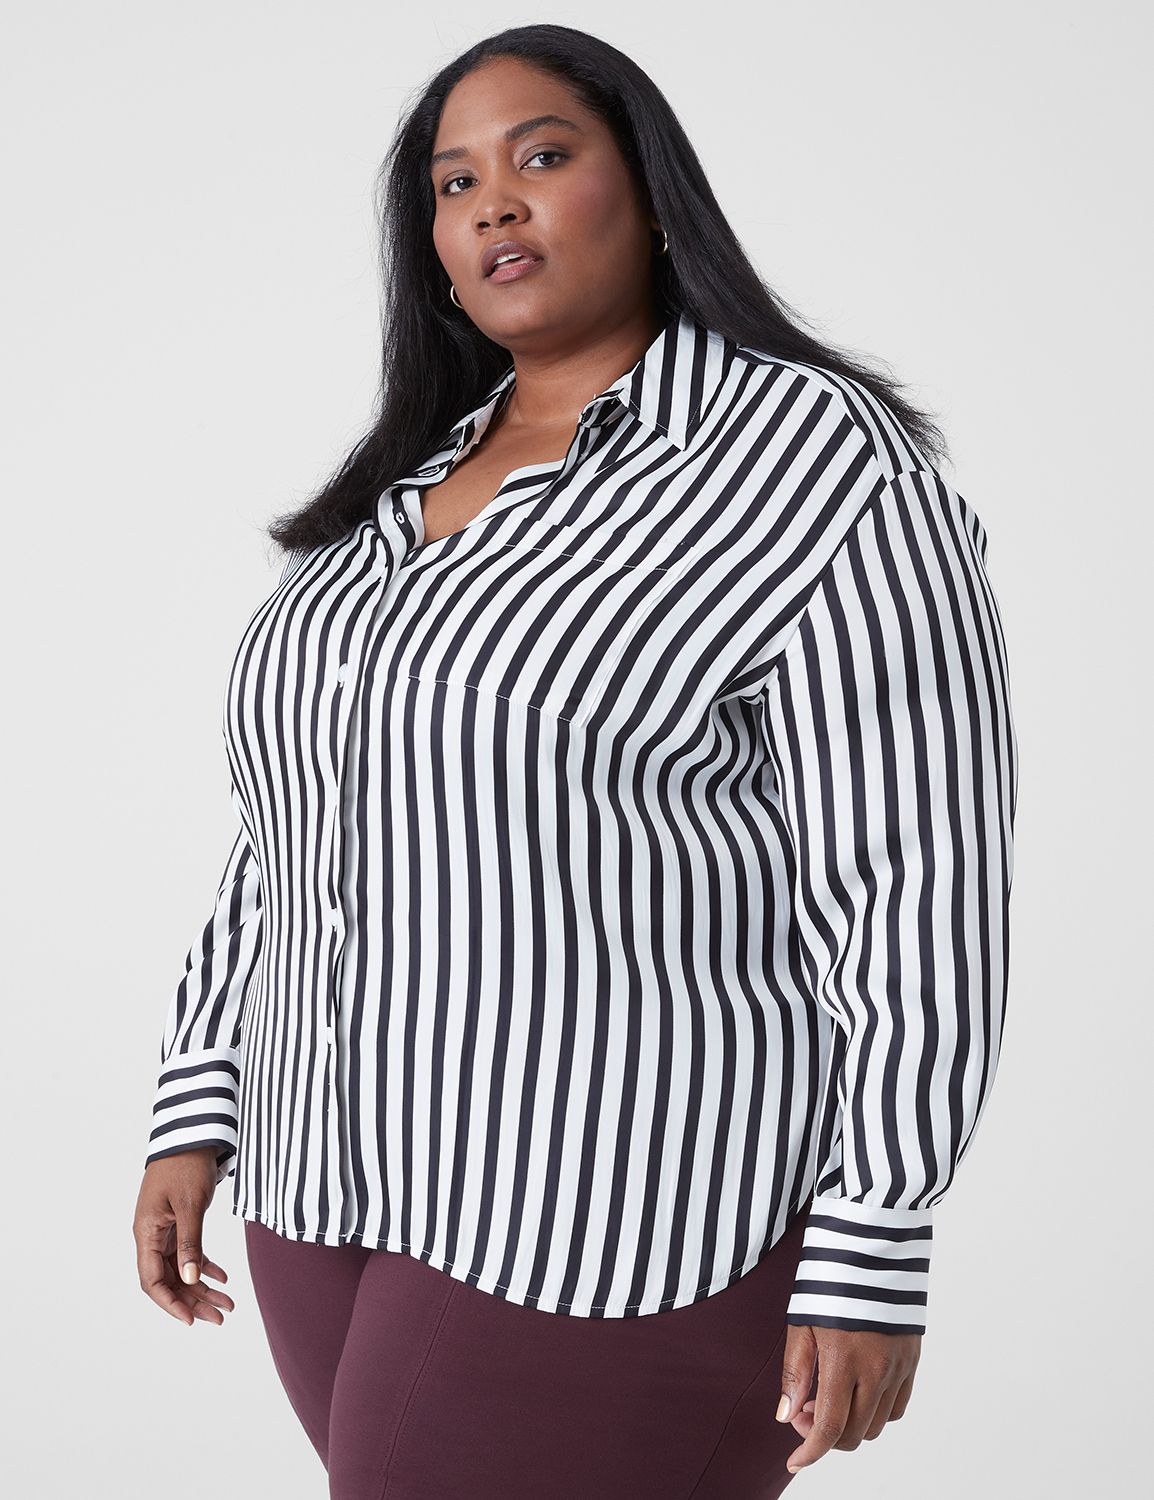 Pin on Plus size outfits